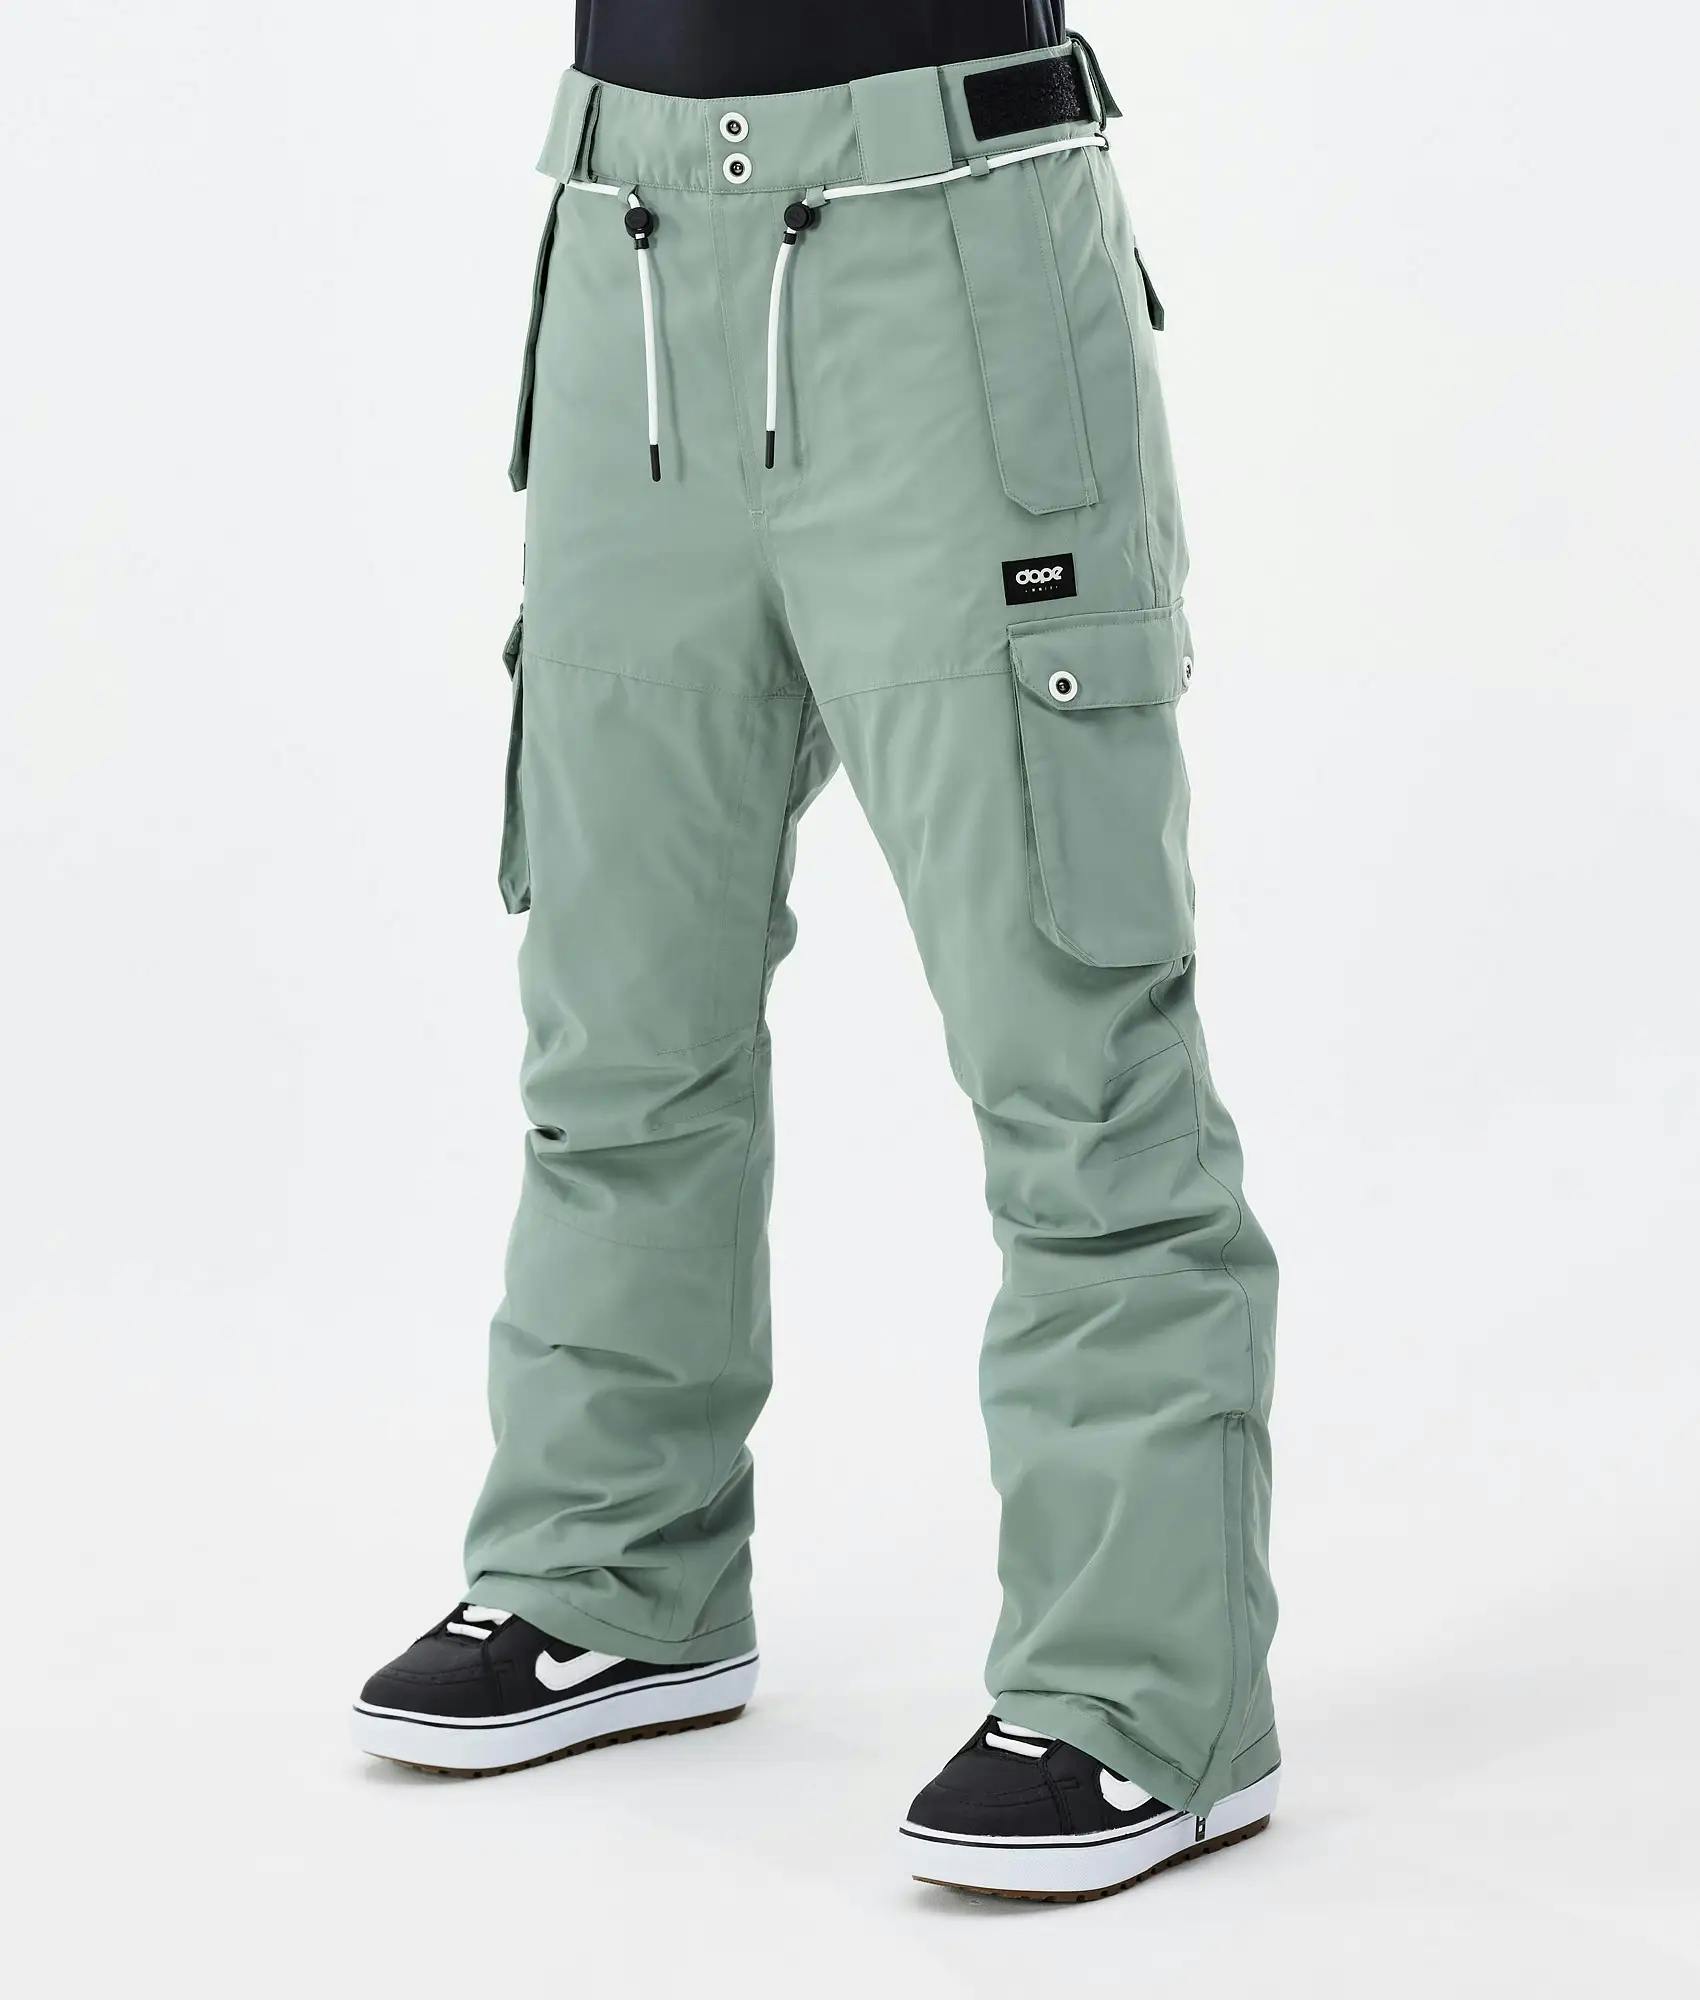 dope iconic W snowboard pants faded green